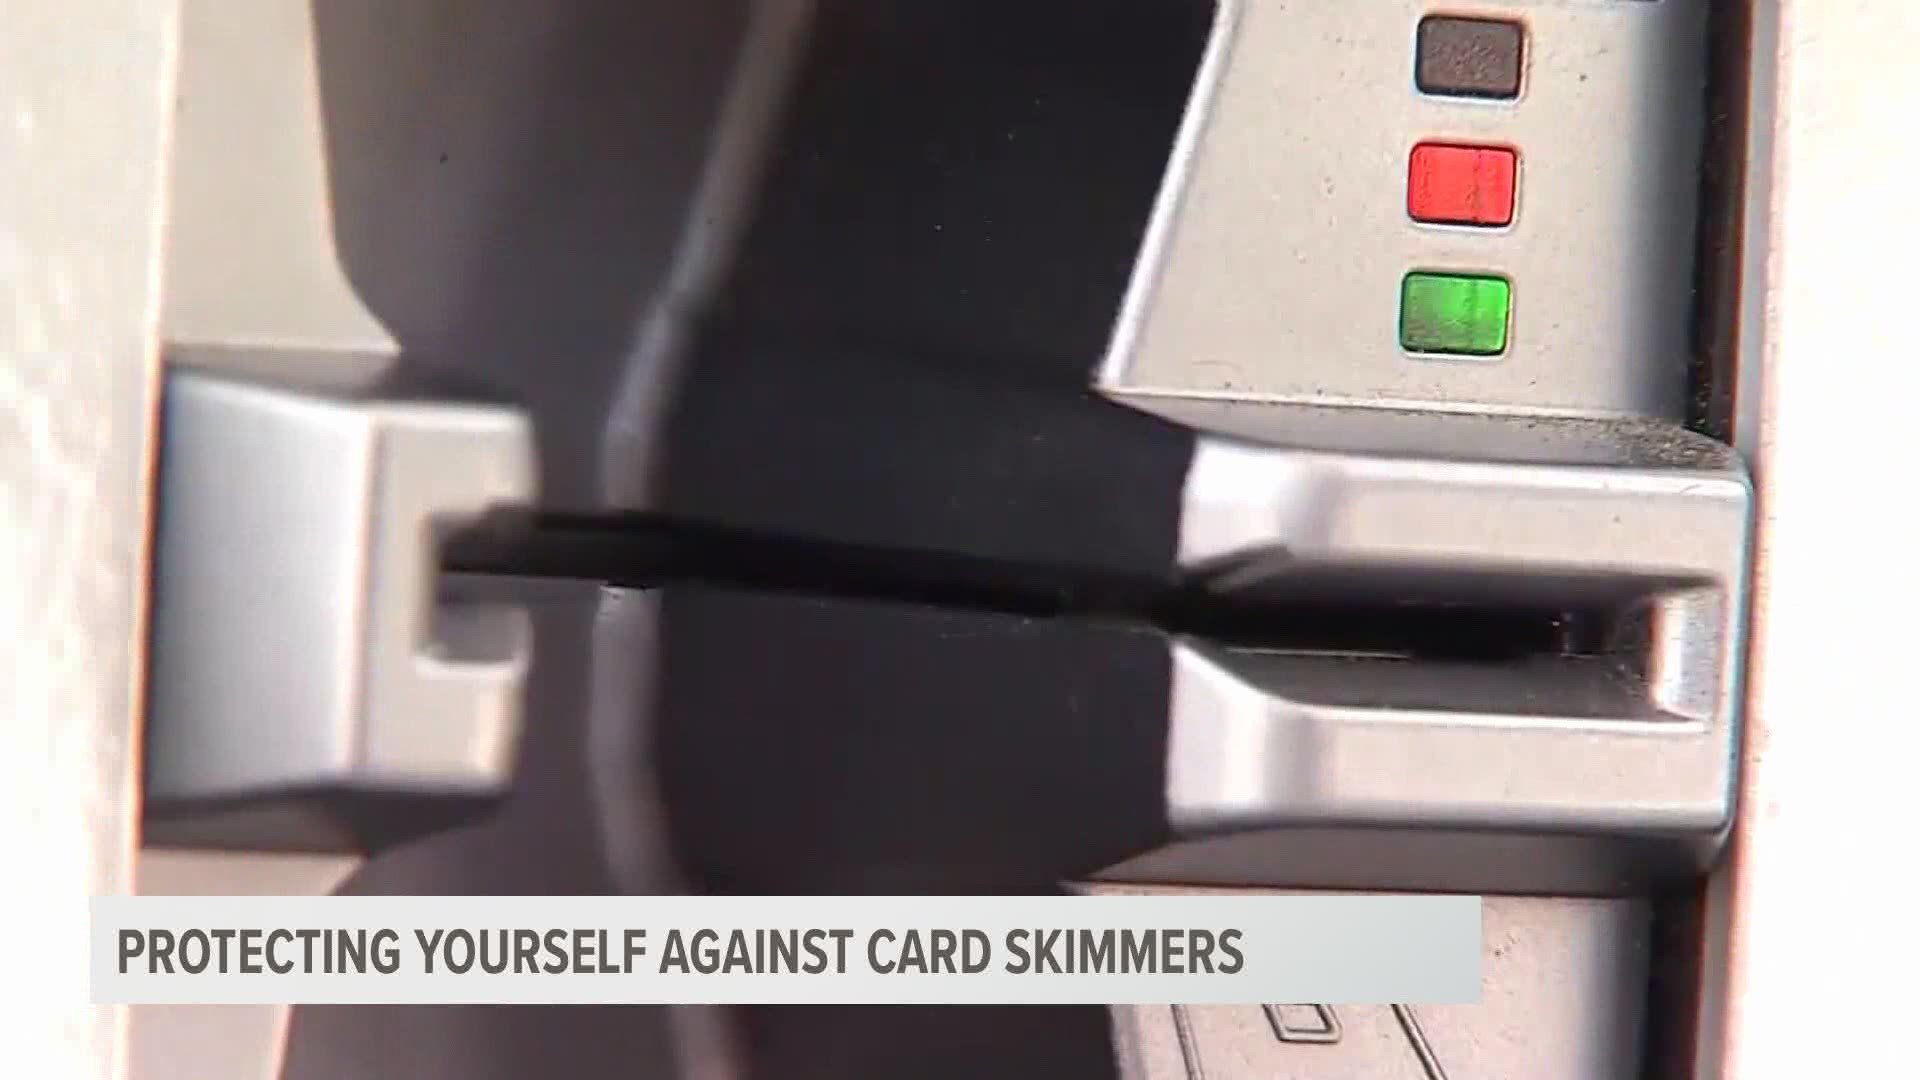 Protecting yourself against card skimmers